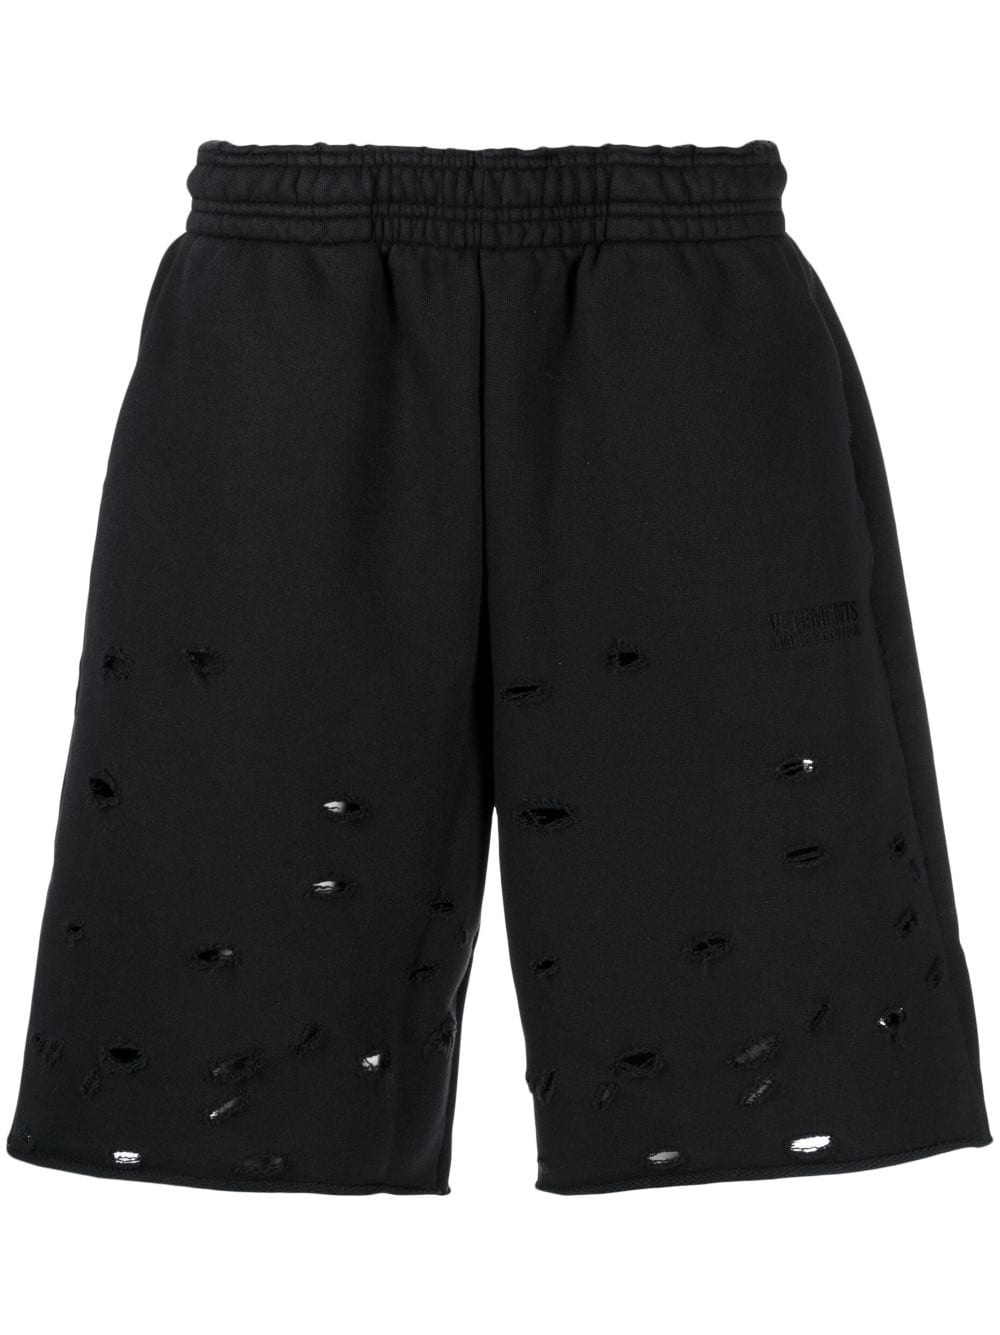 above-knee ripped track shorts